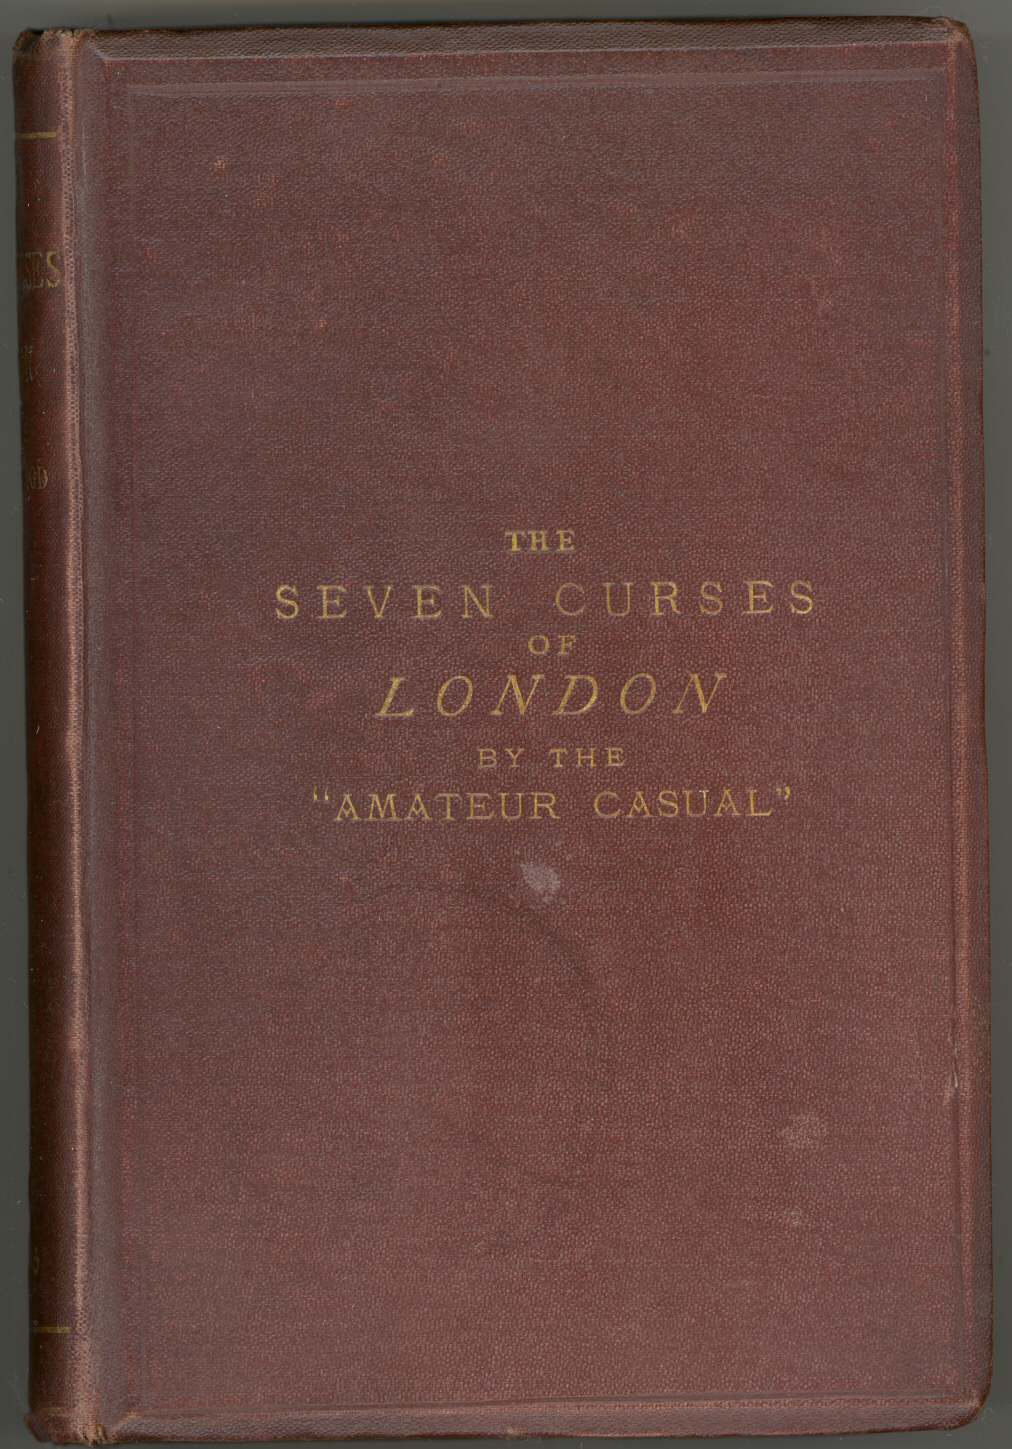 The Seven Curses of London, by James Greenwood picture